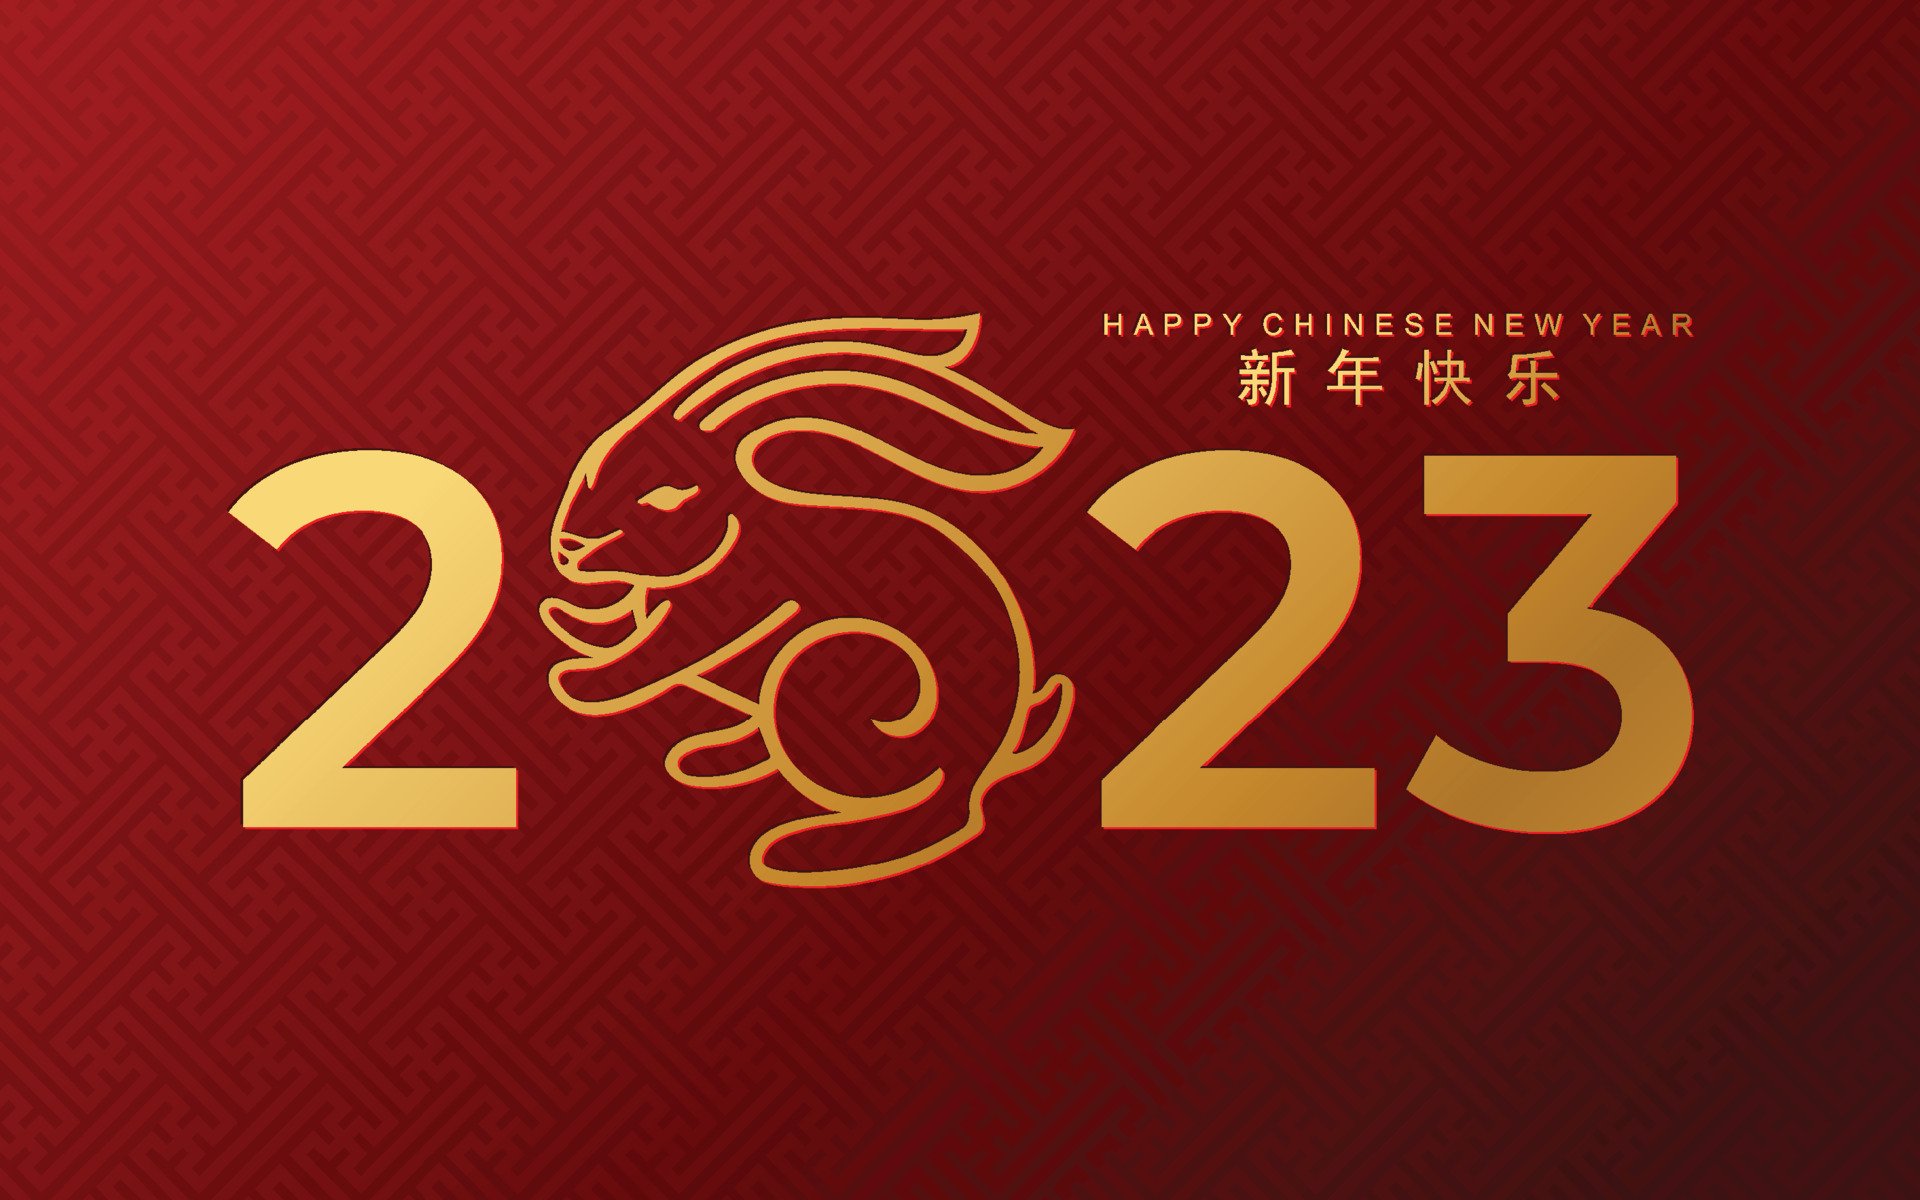 Happy chinese new year 2023 gong xi fa cai year of the rabbit, hares, bunny zodiac sign with flower, lantern, asian elements gold paper cut style on color Background